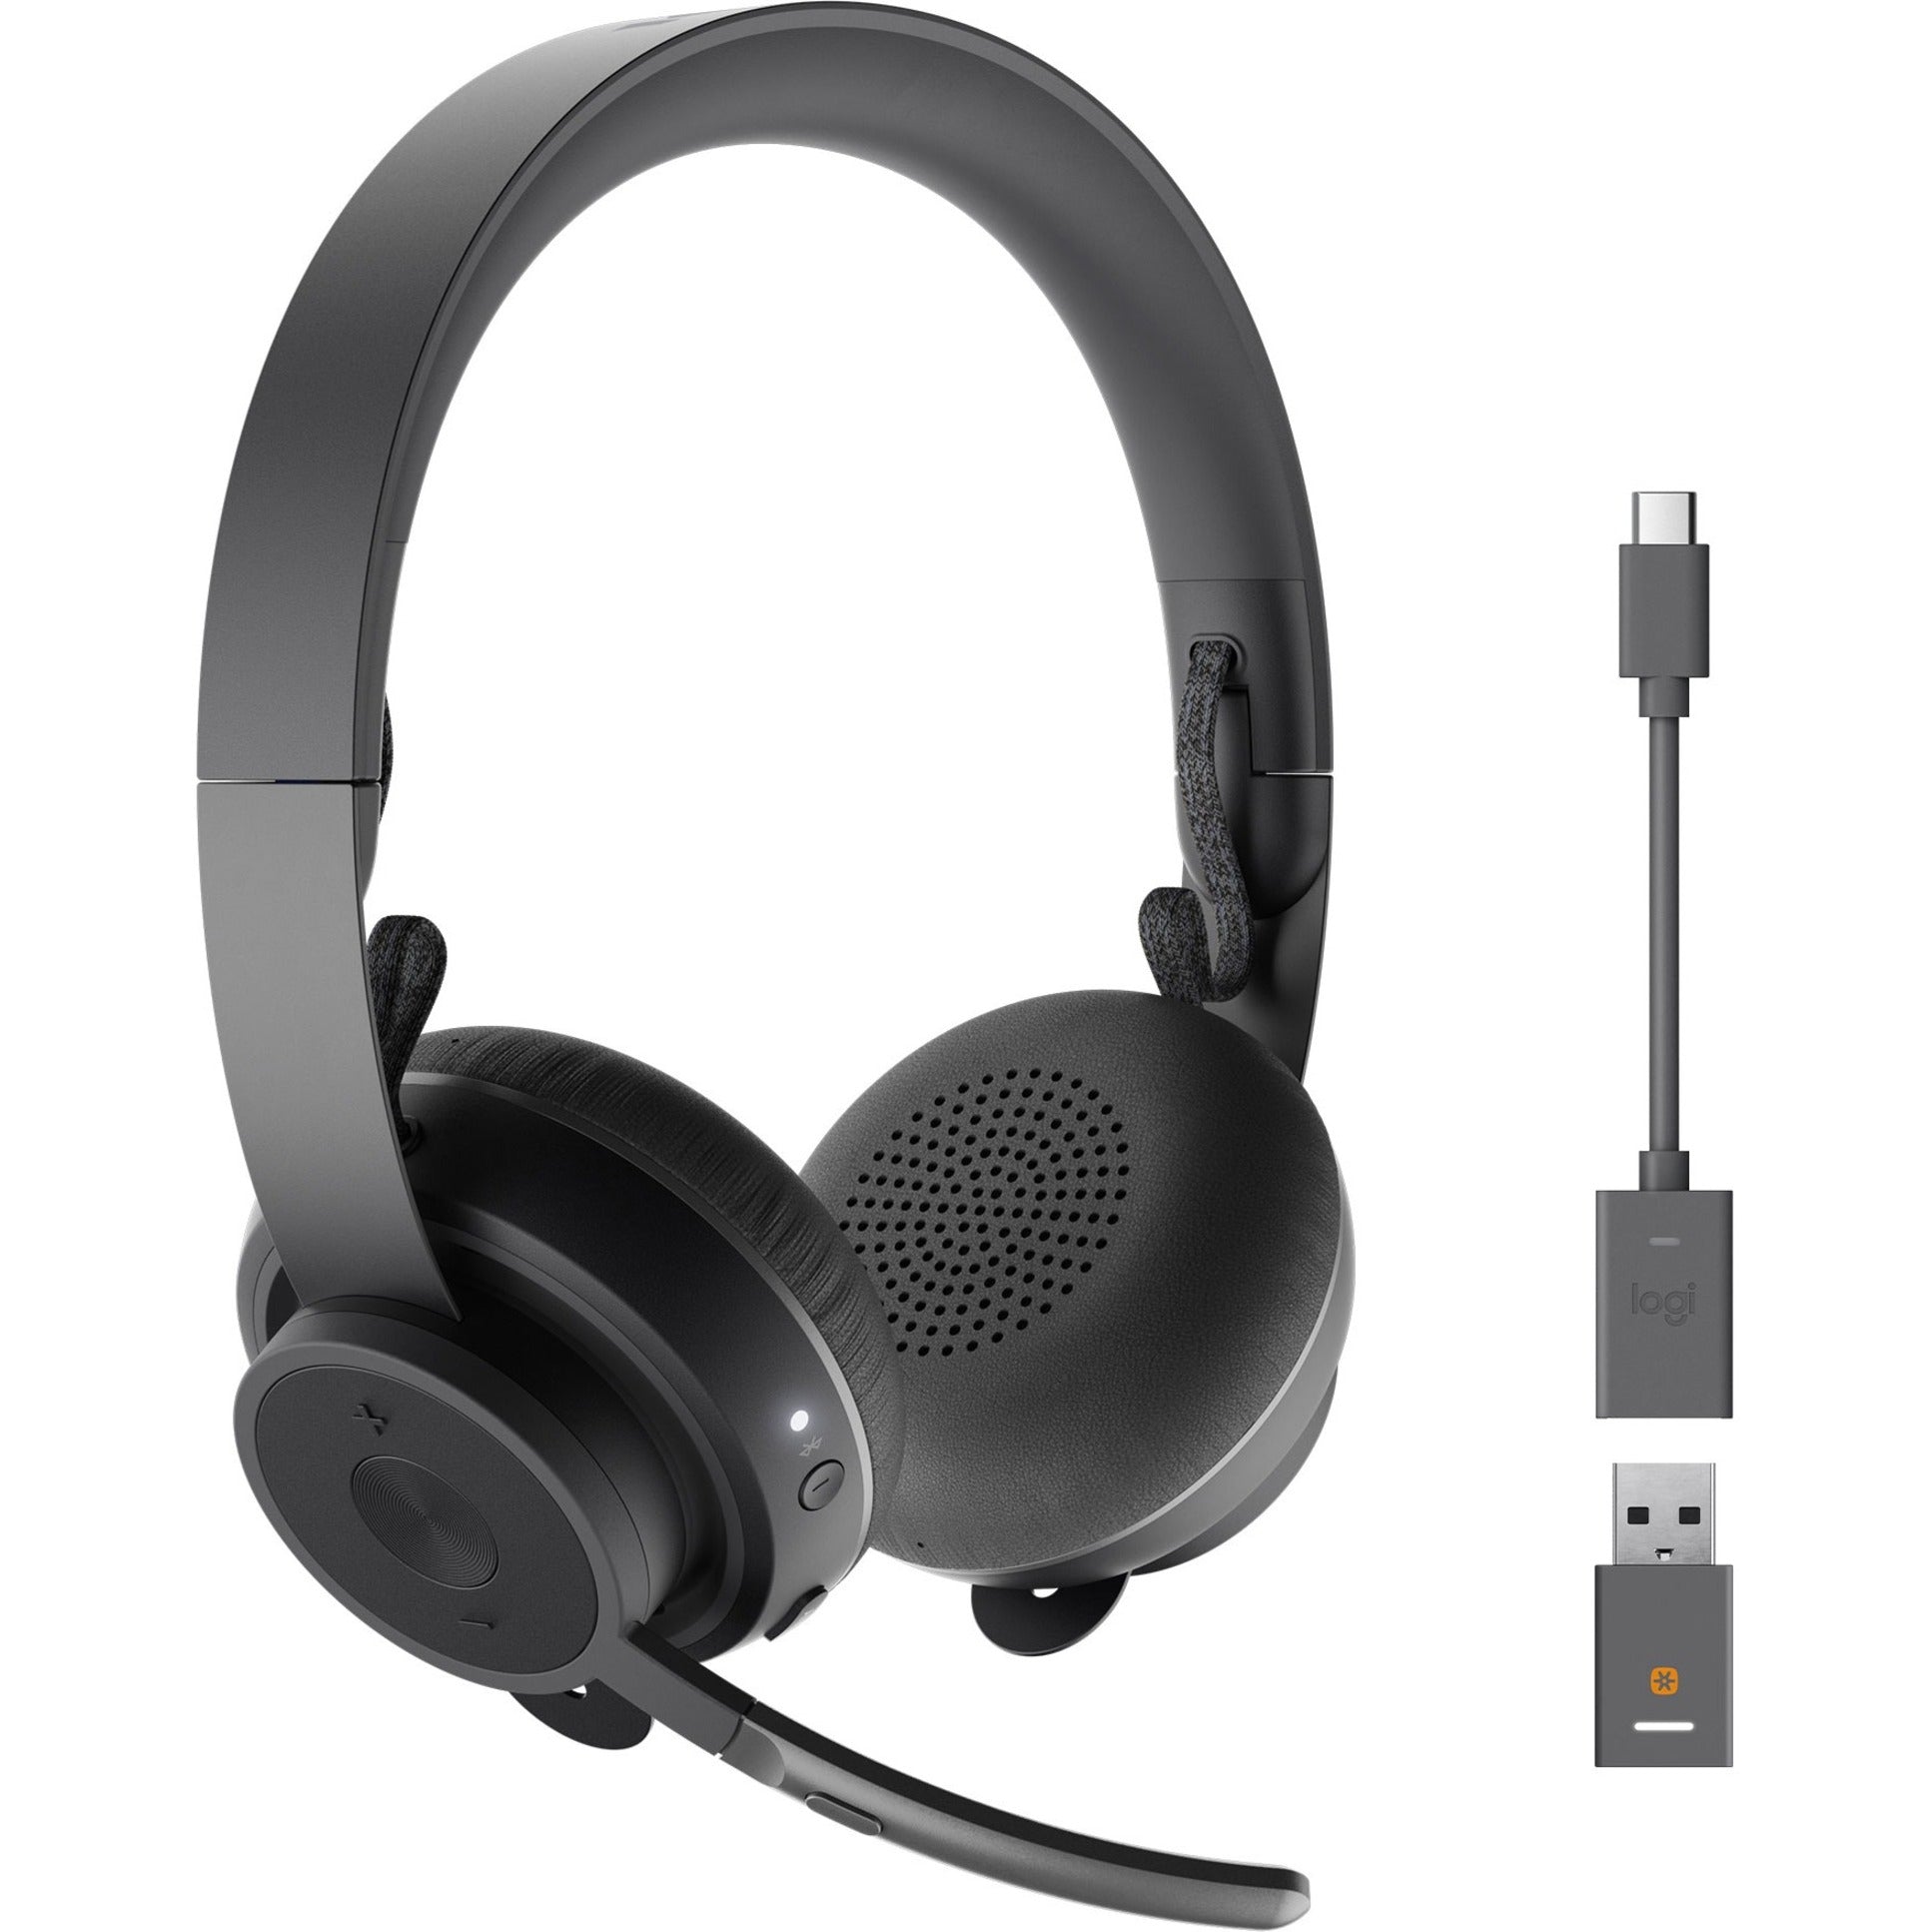 Logitech 981-001100 Zone 900 Headset, Wireless Bluetooth Over-Ear Headset with Noise Canceling, Graphite